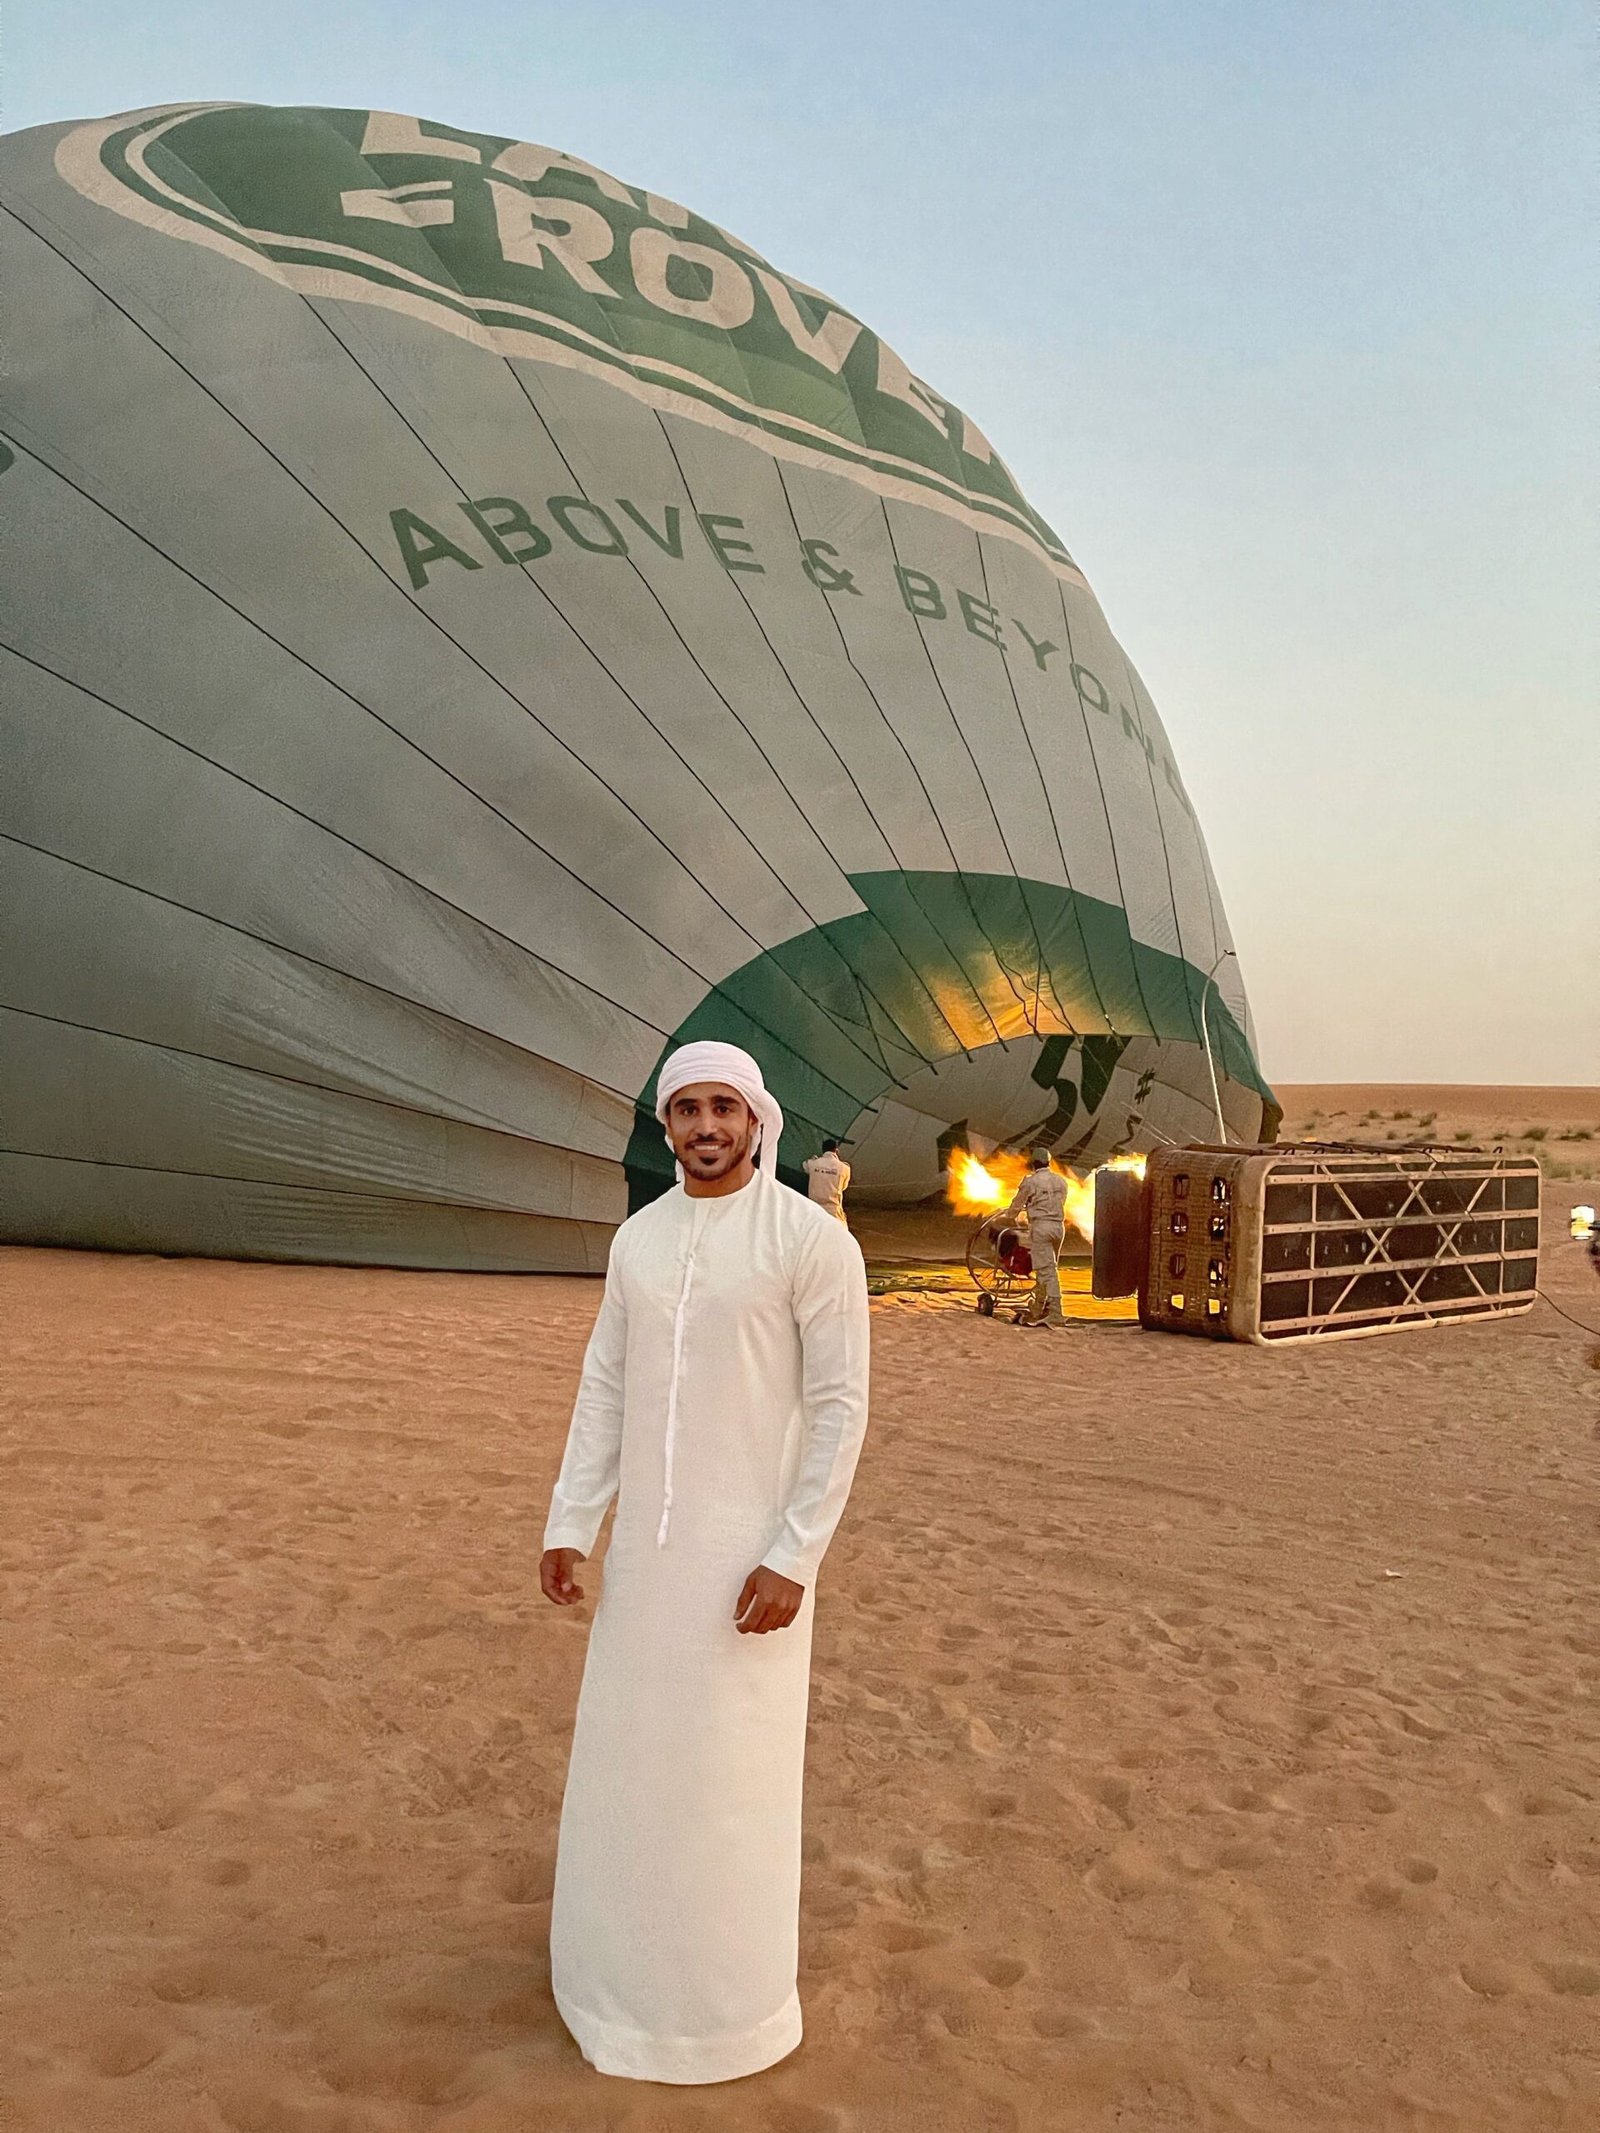 Hot Air Balloon ride in Dubai, get your tickets now